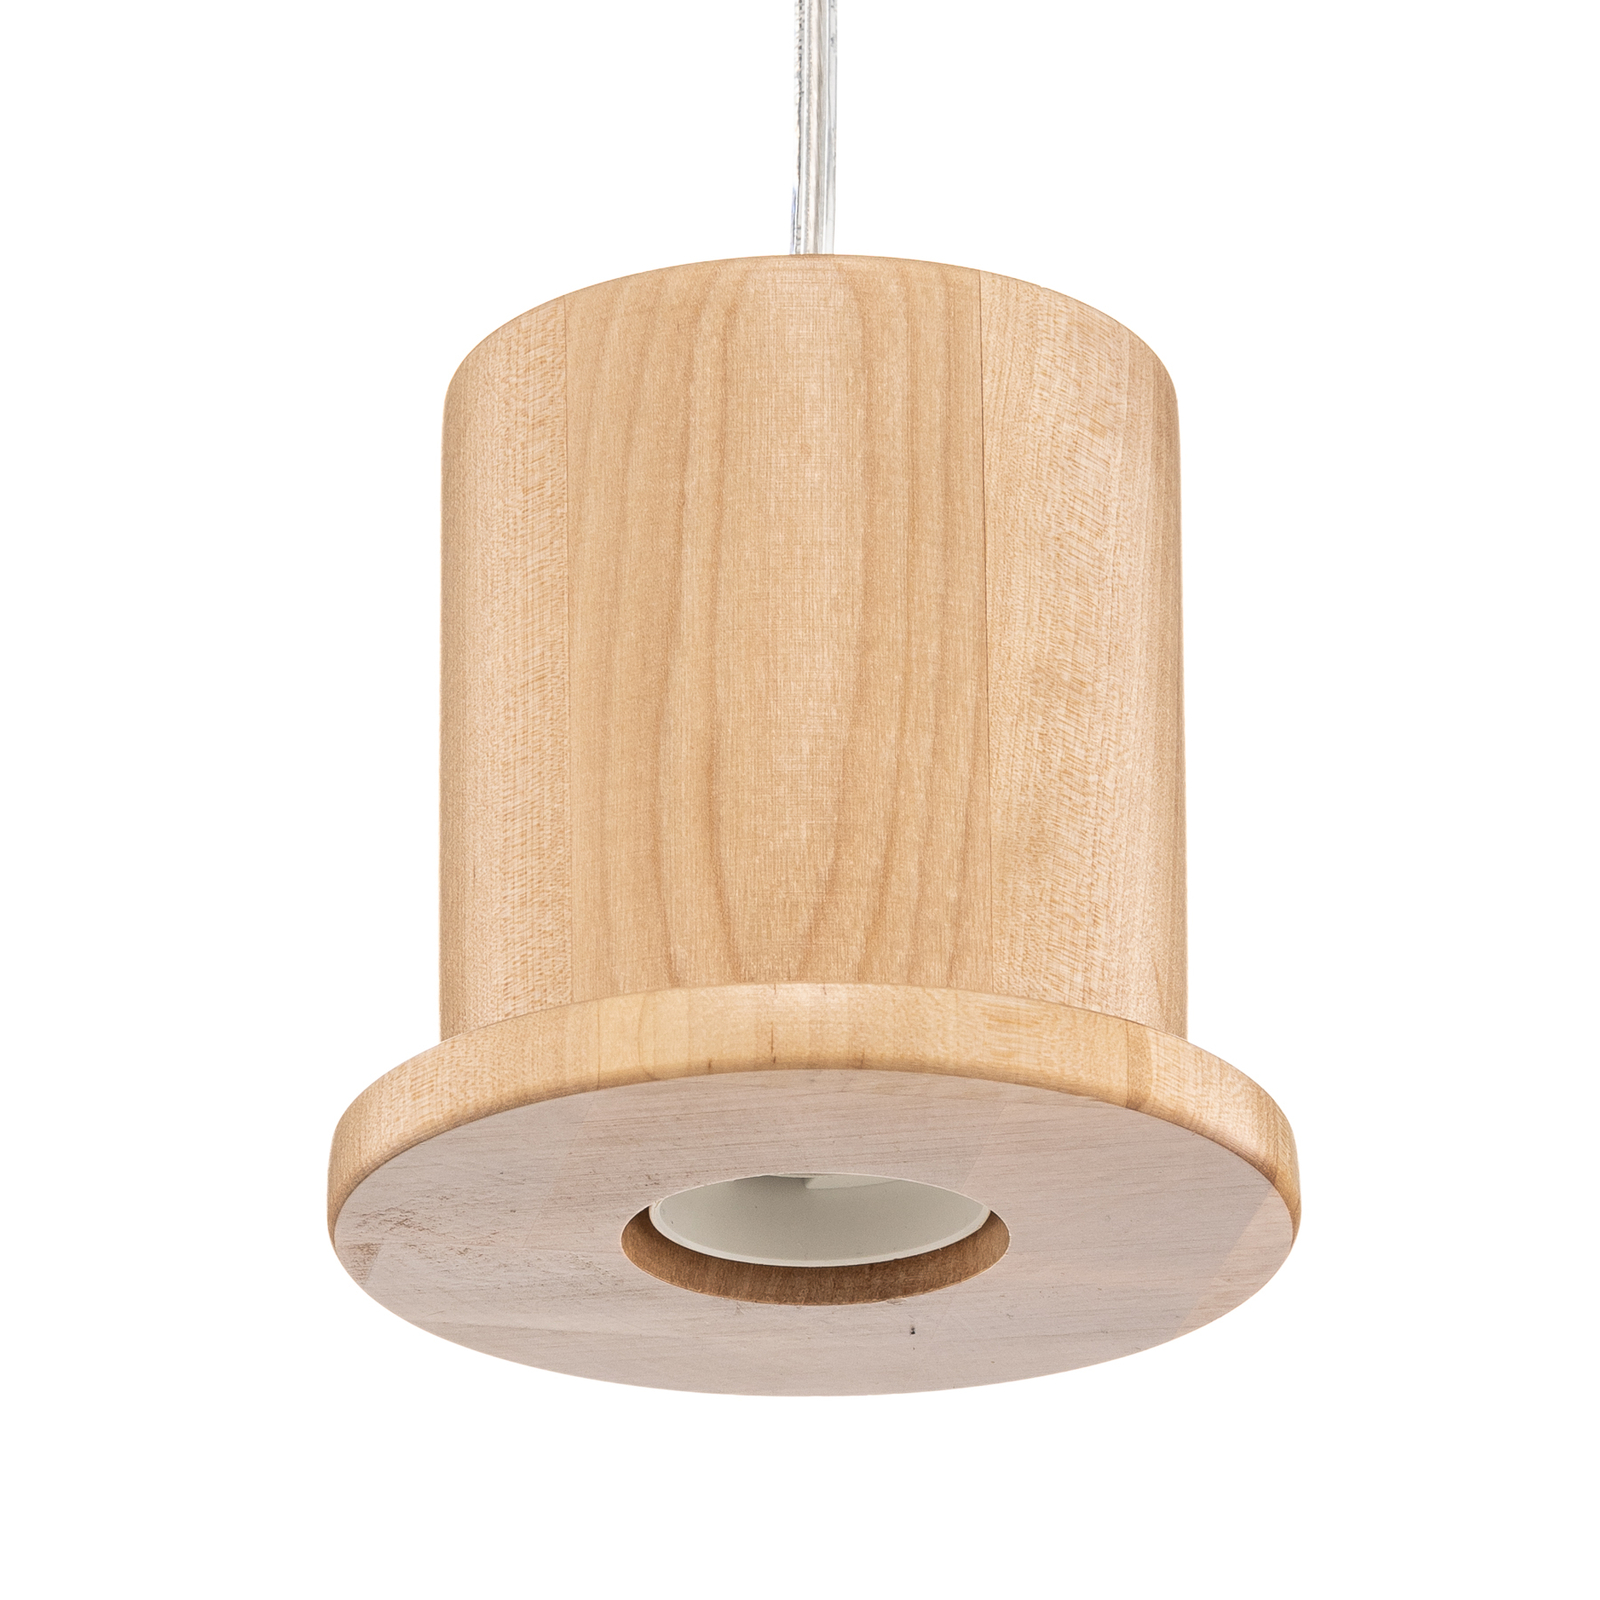 Head hanging light with socket made of light wood